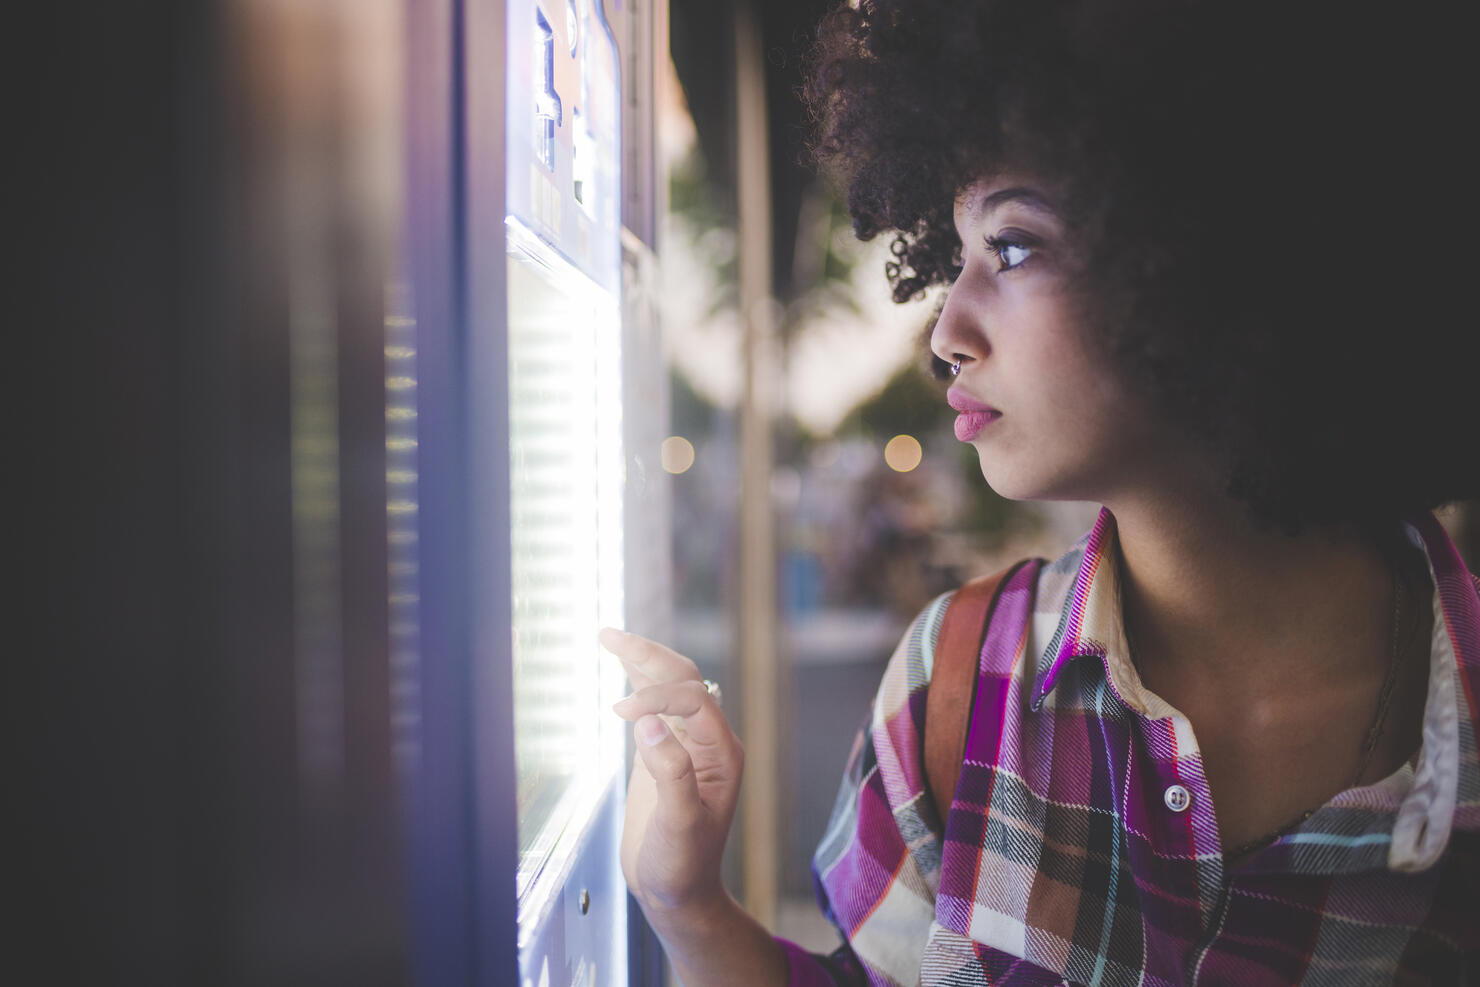 Young woman with afro hairdo using touchscreen vending machine in the city